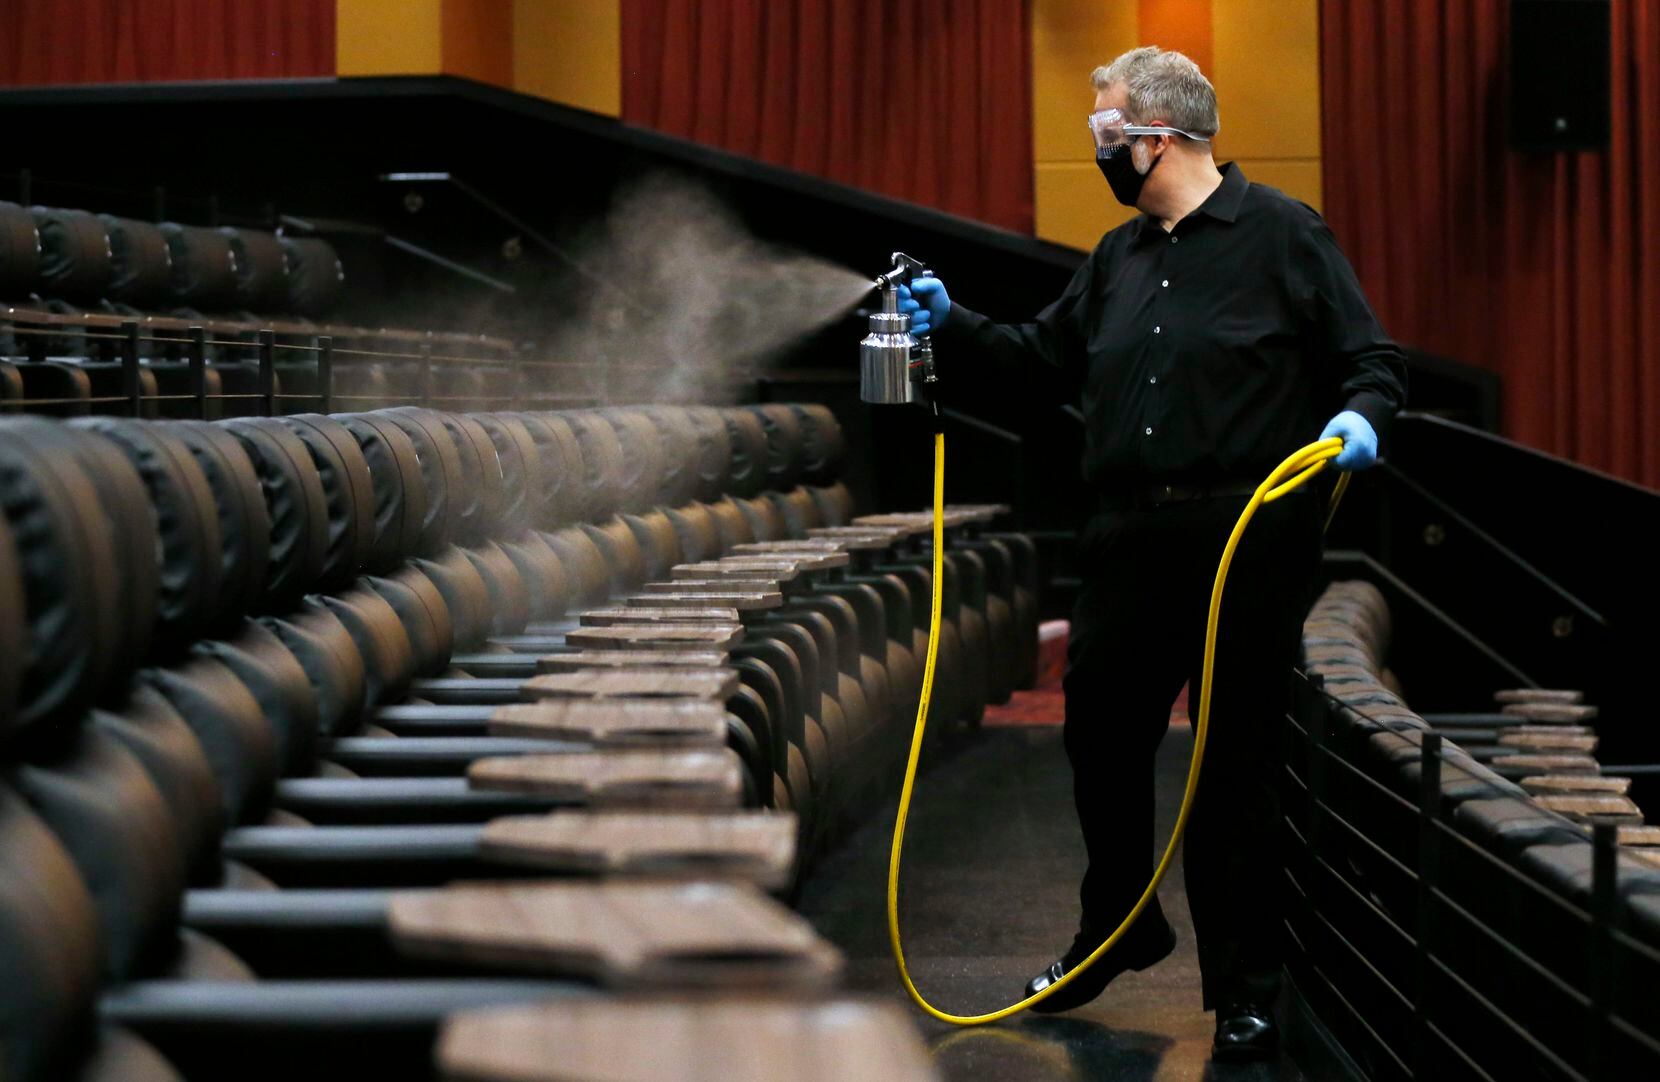 Cinemark West general manager Lindsey Hearn sprays disinfectant on seats in an auditorium the morning before they reopen at Cinemark West in Plano, on Friday, June 19, 2020. After being closed for months due to the coronavirus pandemic, the theater is reopening Friday. (Vernon Bryant/The Dallas Morning News)